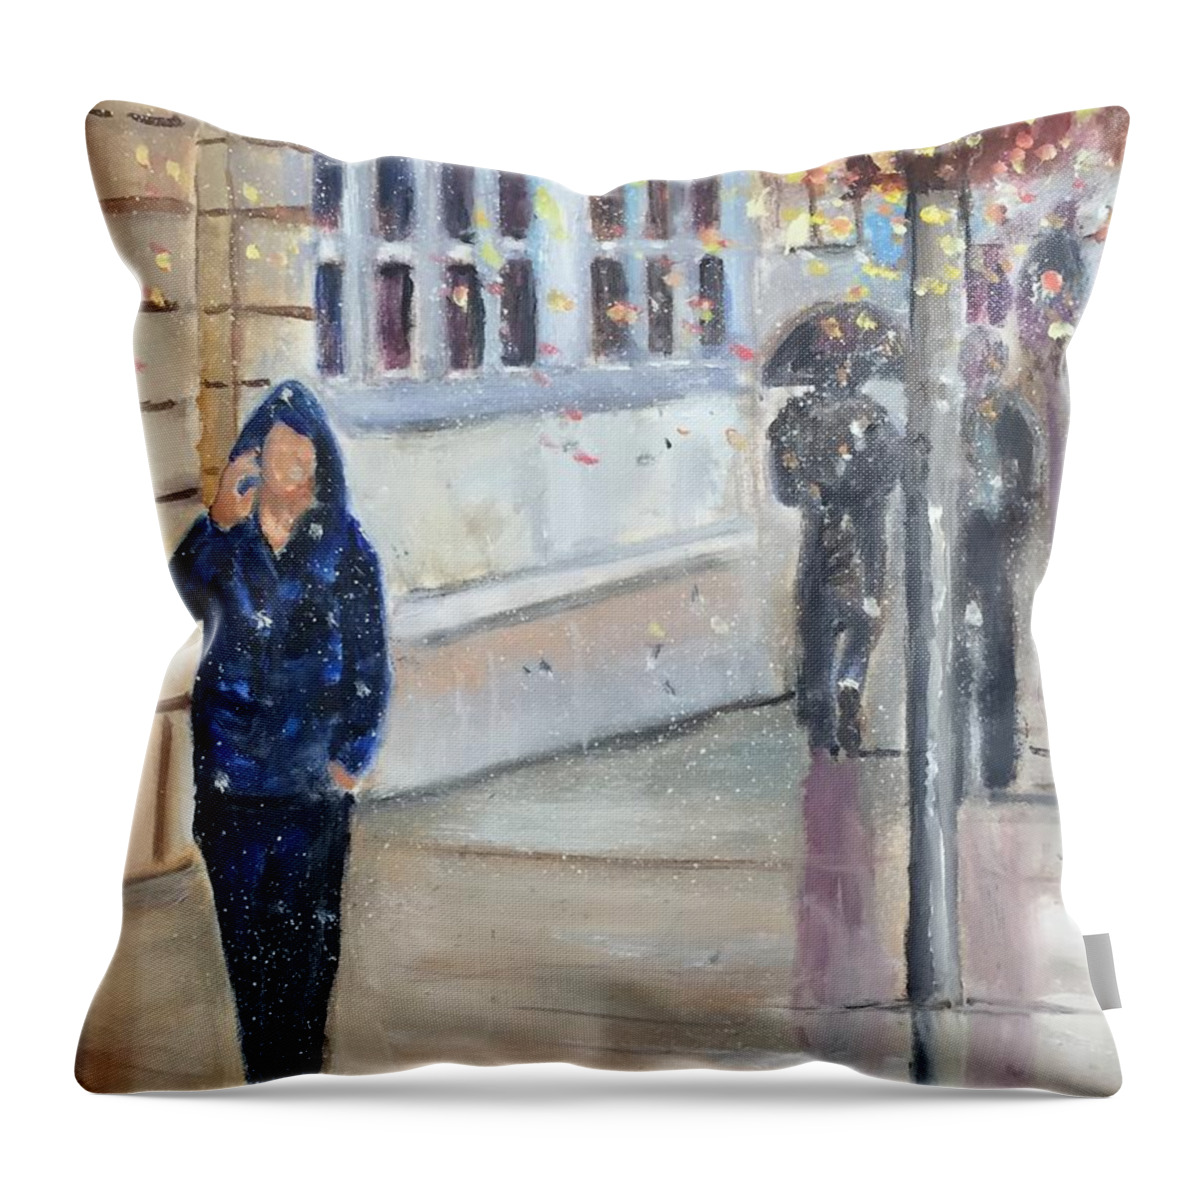 Rain Throw Pillow featuring the painting Rainy Day by Gloria Smith